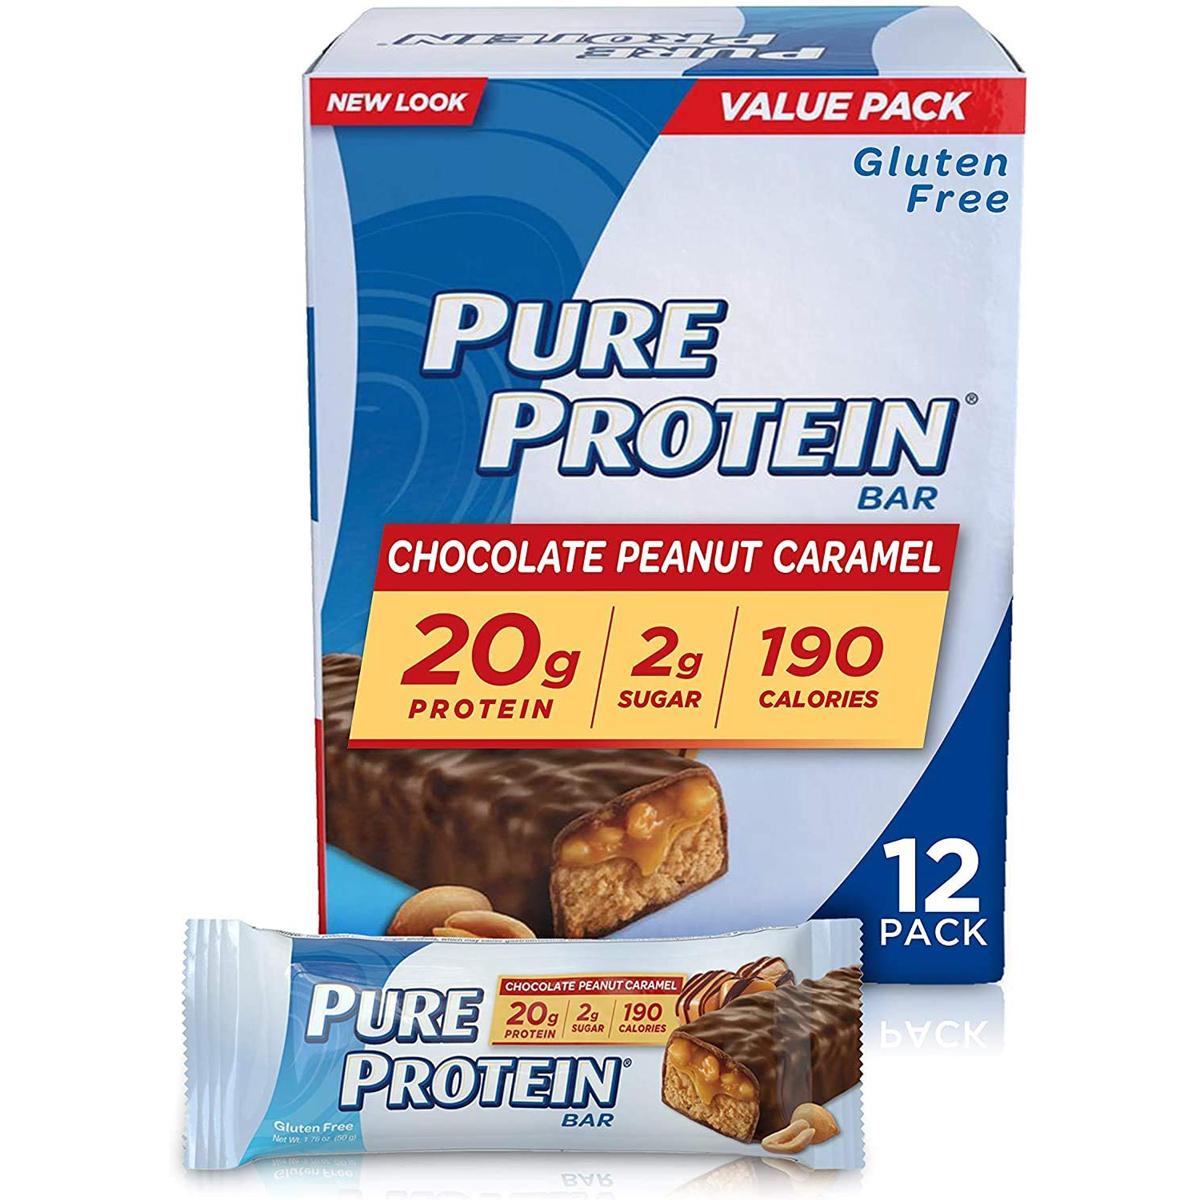 12 Pure Protein Chocolate Peanut Caramel for $8.41 Shipped